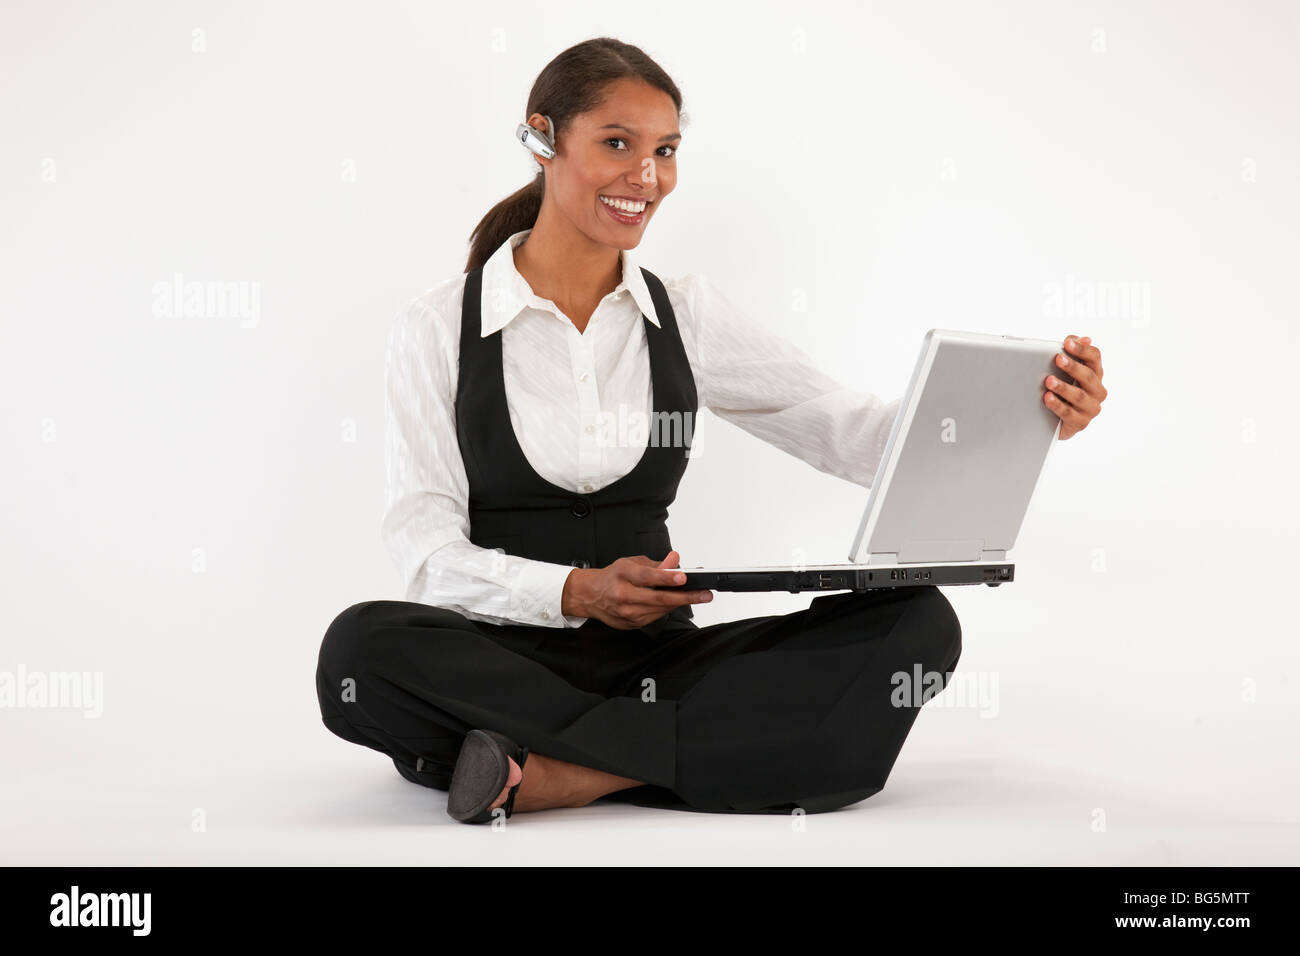 Young woman sitting on floor using laptop and wearing blue tooth headset. Horizontally format. Stock Photo